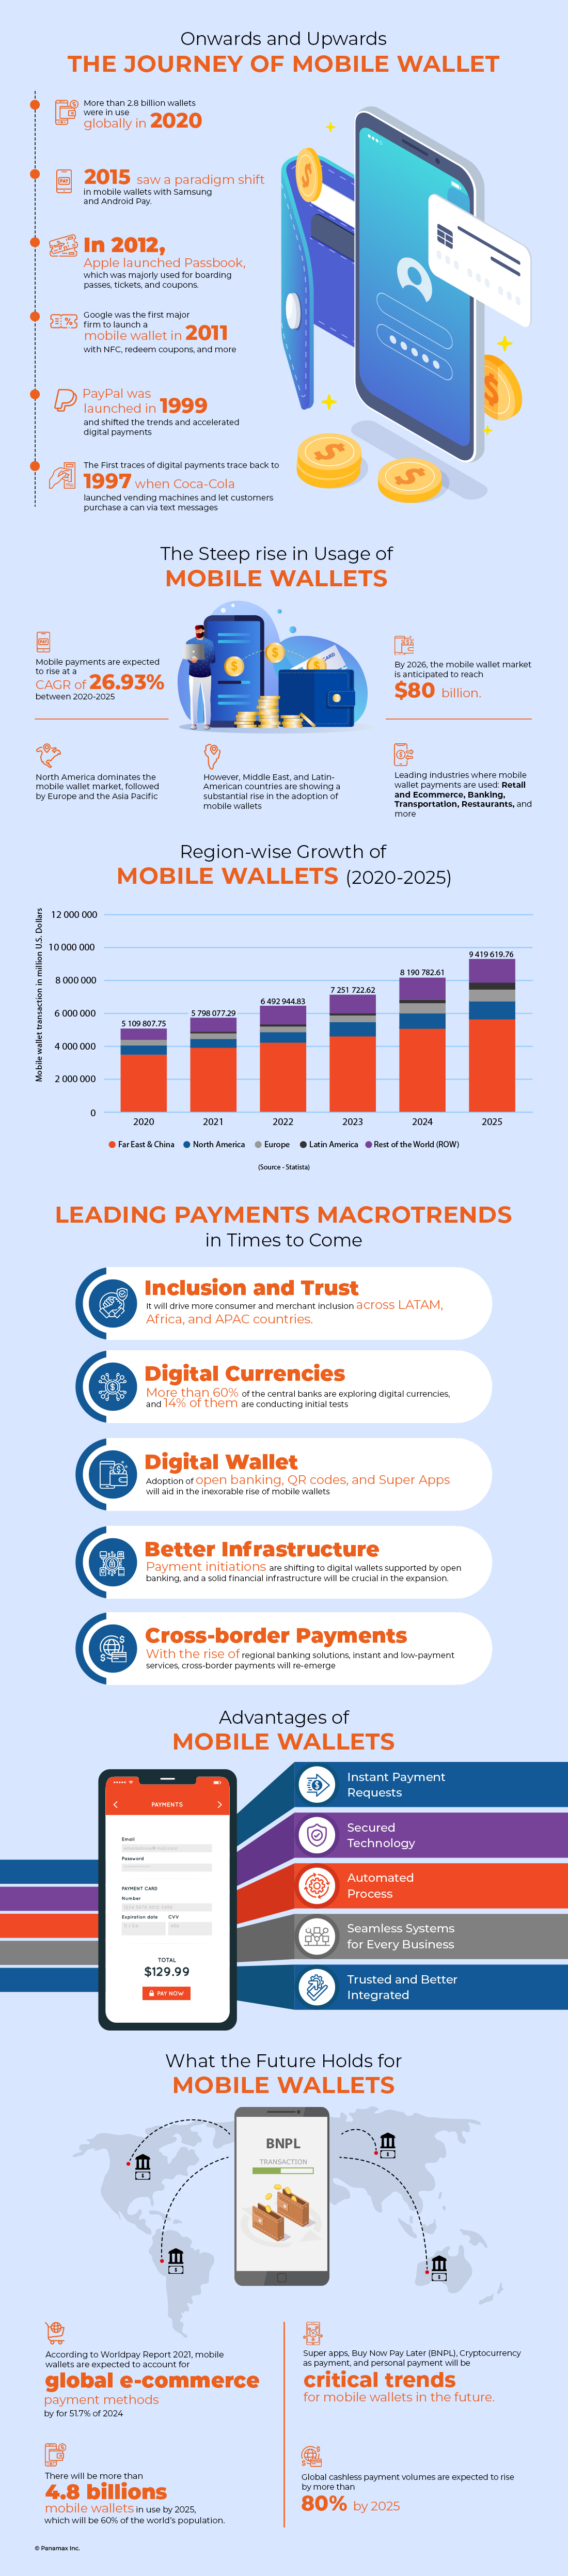 The Journey of Mobile Wallet Infographic